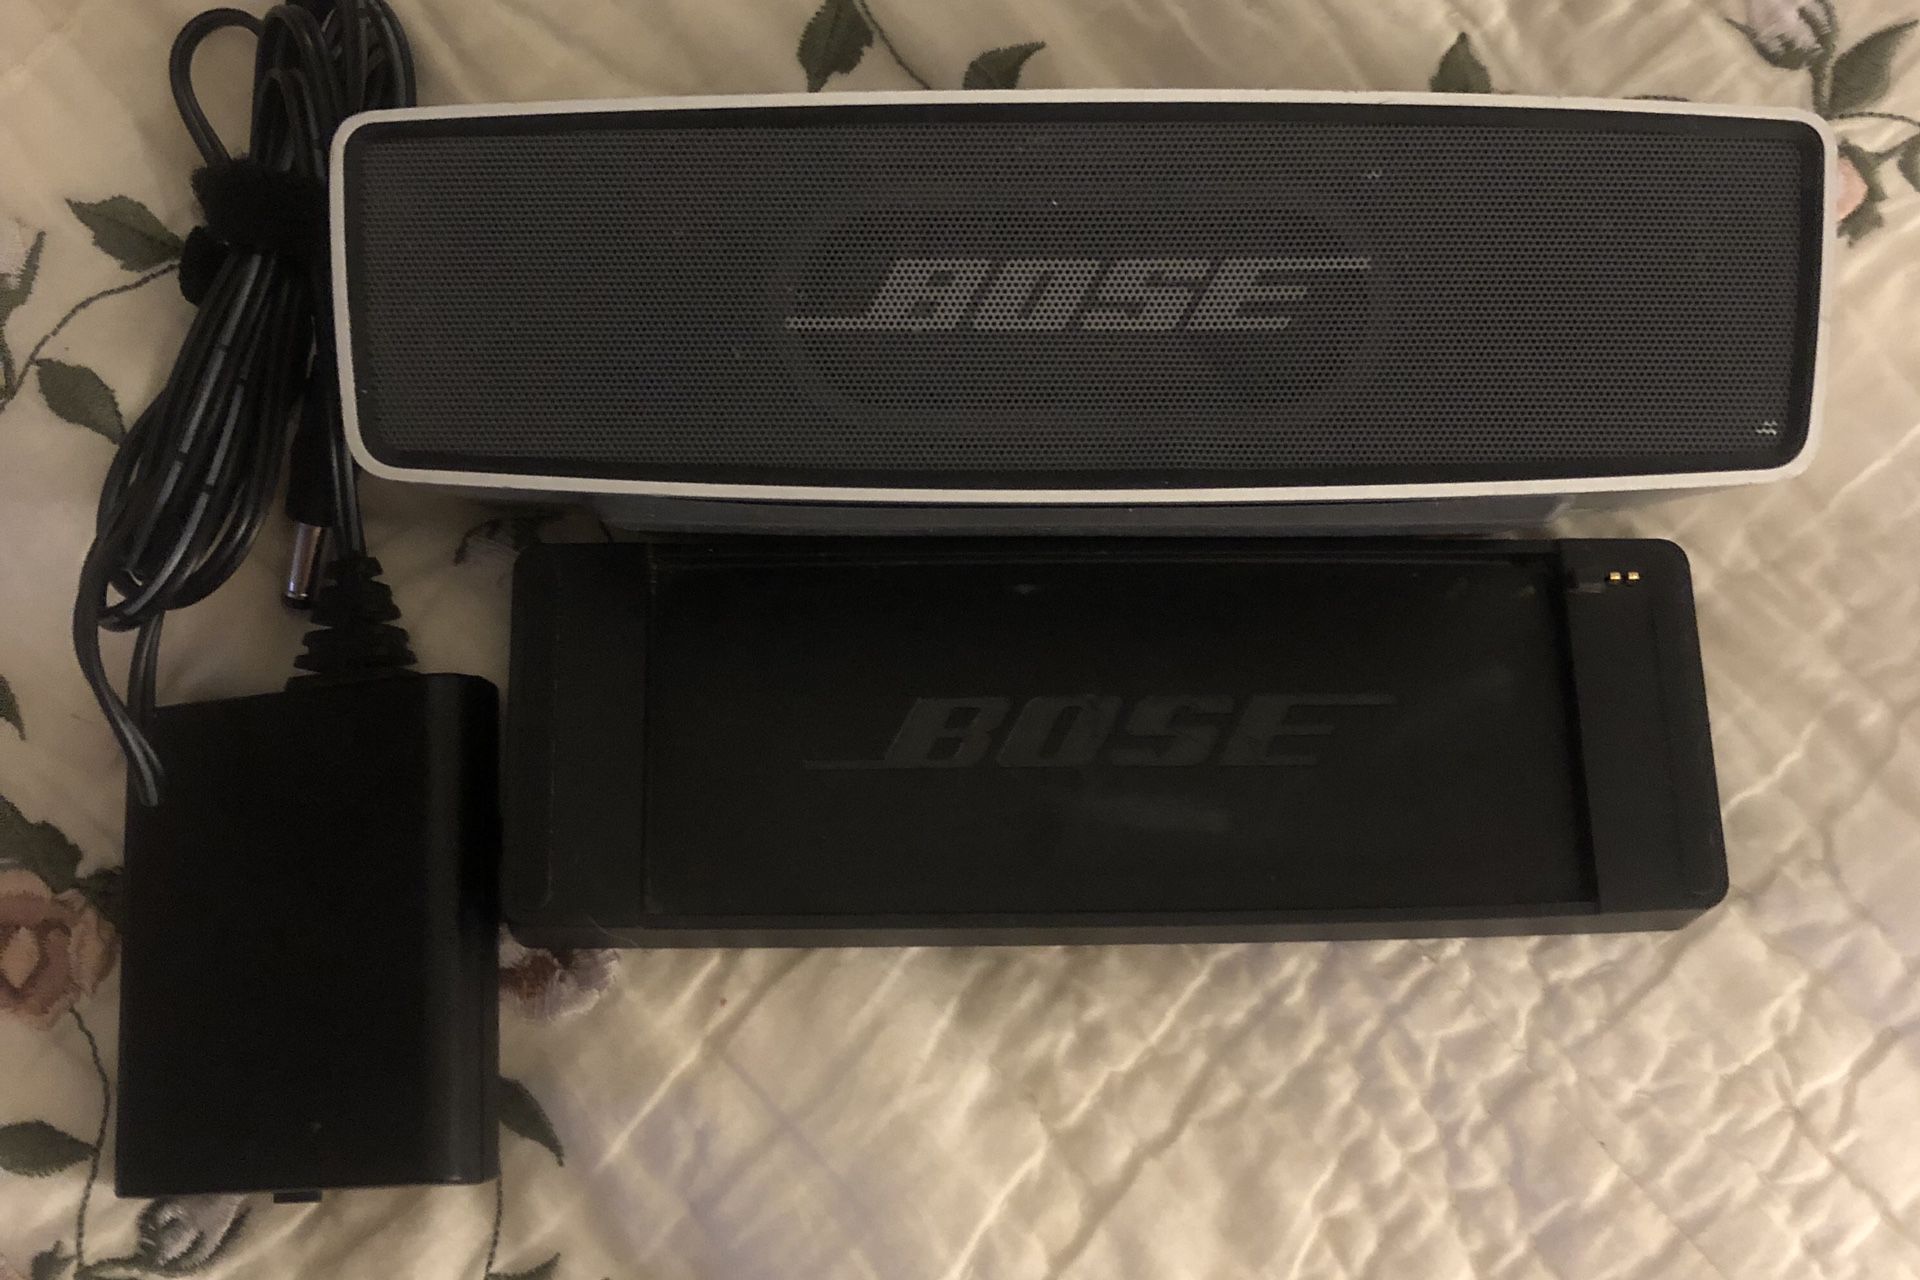 Bose Soundlink Mini Bluetooth Speaker, With Charging Cradle And Cord. Small Dent In Front Grill. Doesn’t Effect Sound At All. Awesome Sound. We can m